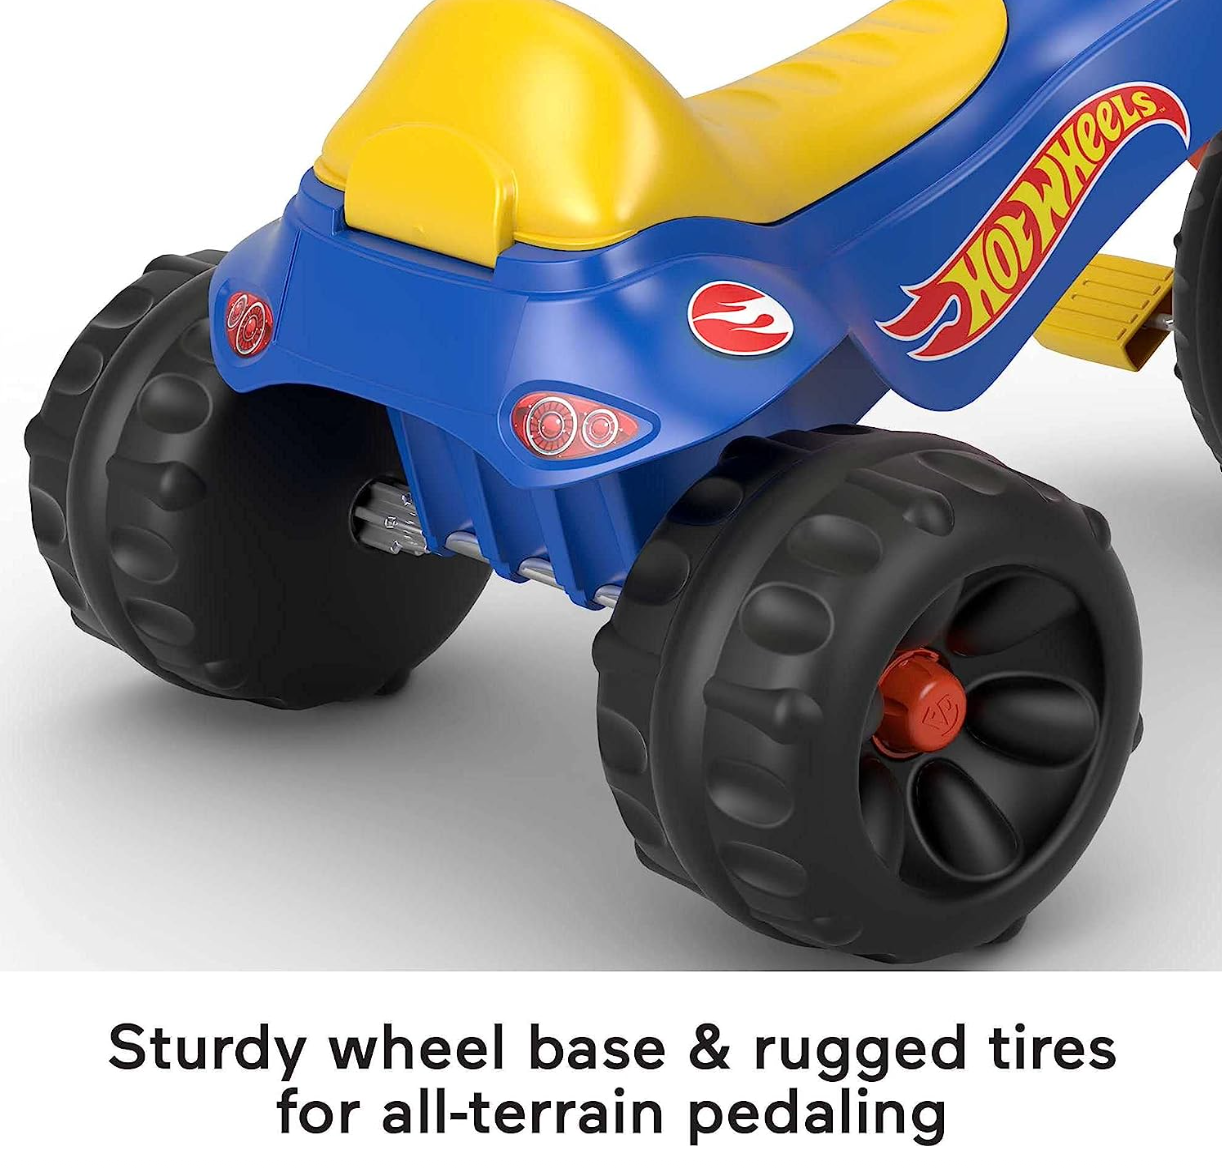 Fisher-Price Hot Wheels Toddler Tricycle Tough Trike Bike with Handlebar Grips and Storage for Preschool Kids